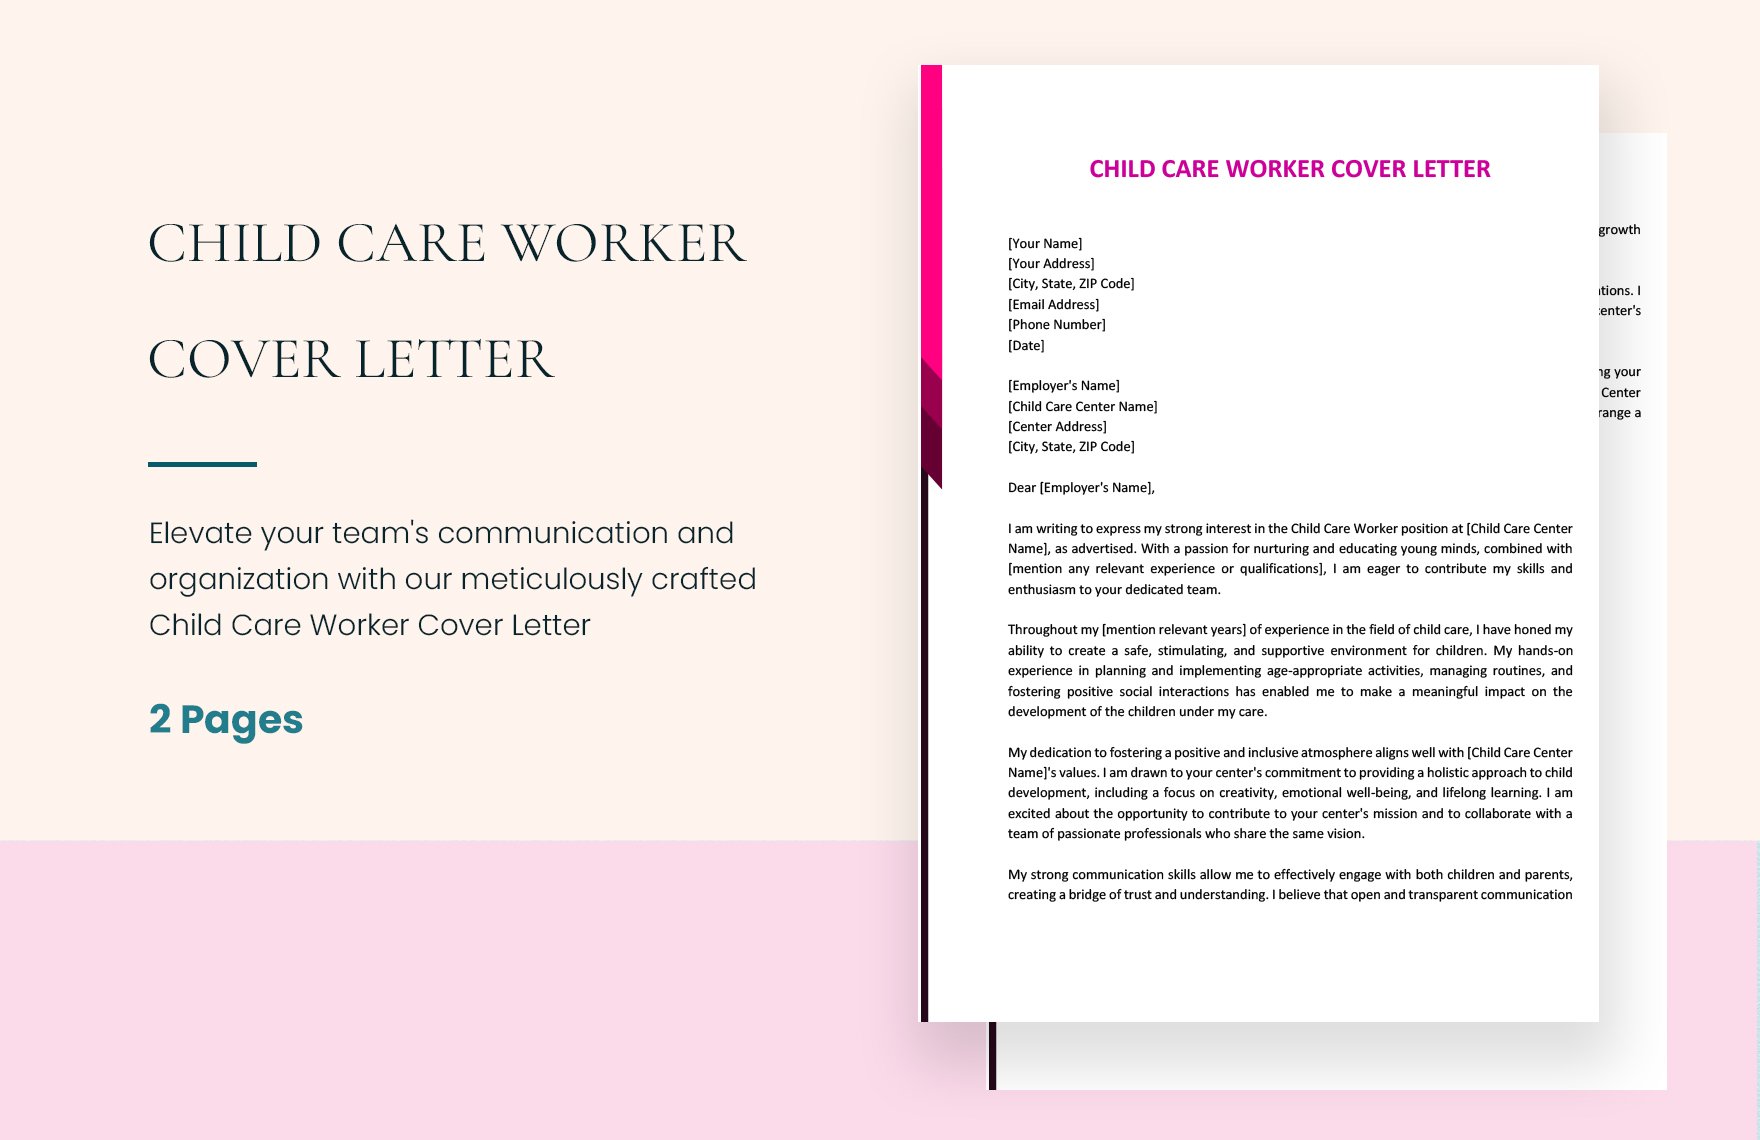 Child Care Worker Cover Letter in Word, Google Docs, PDF